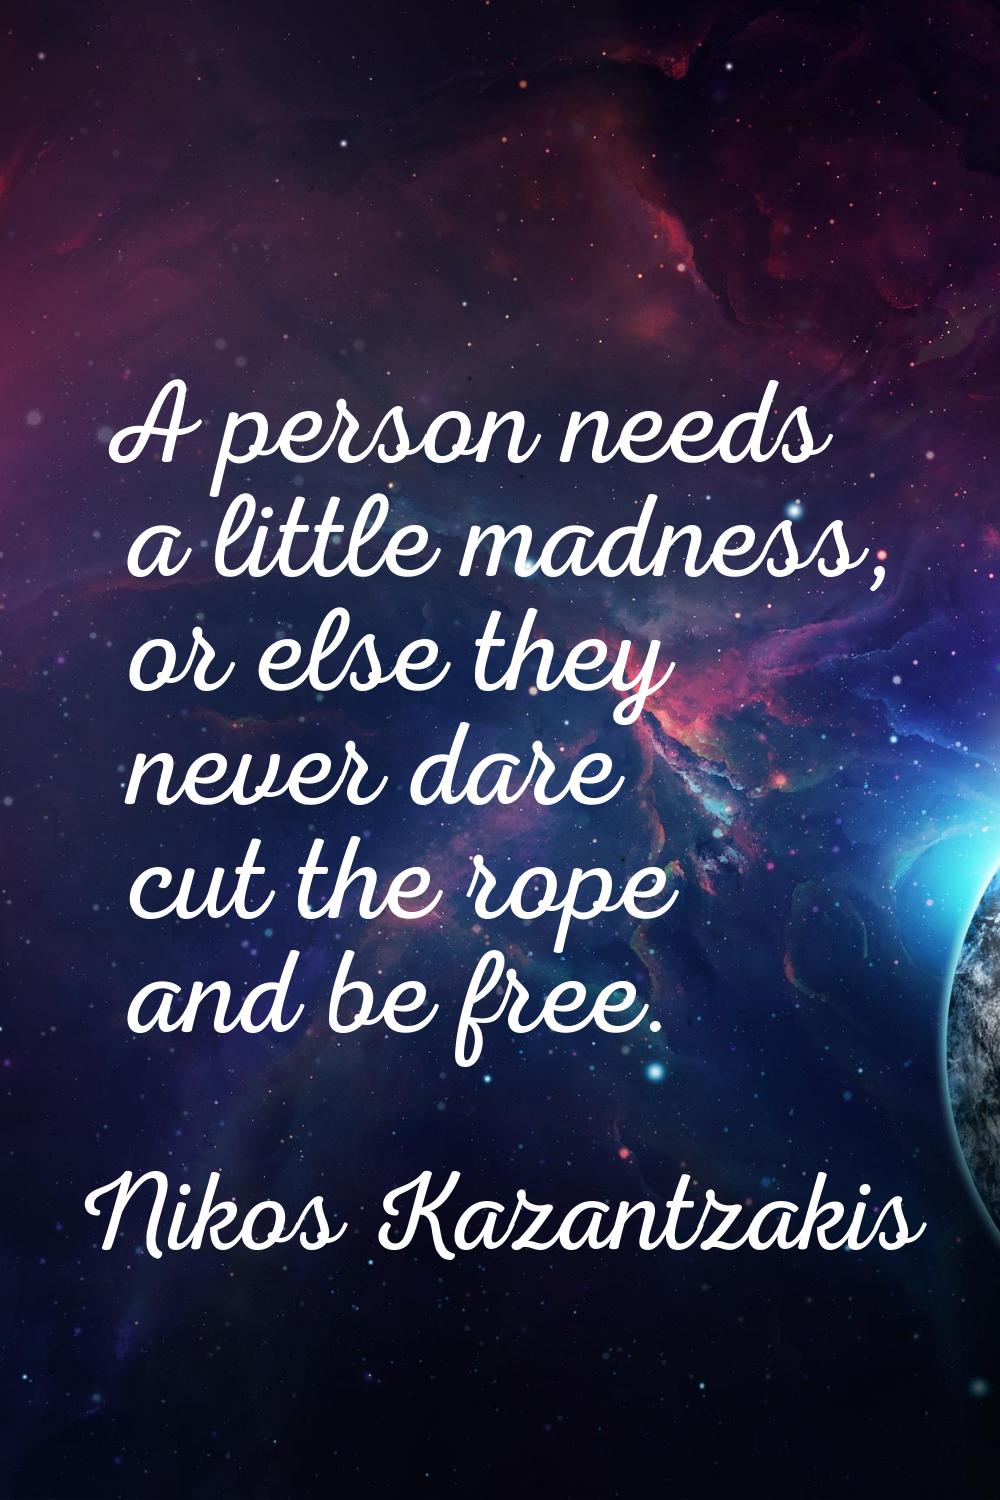 A person needs a little madness, or else they never dare cut the rope and be free.